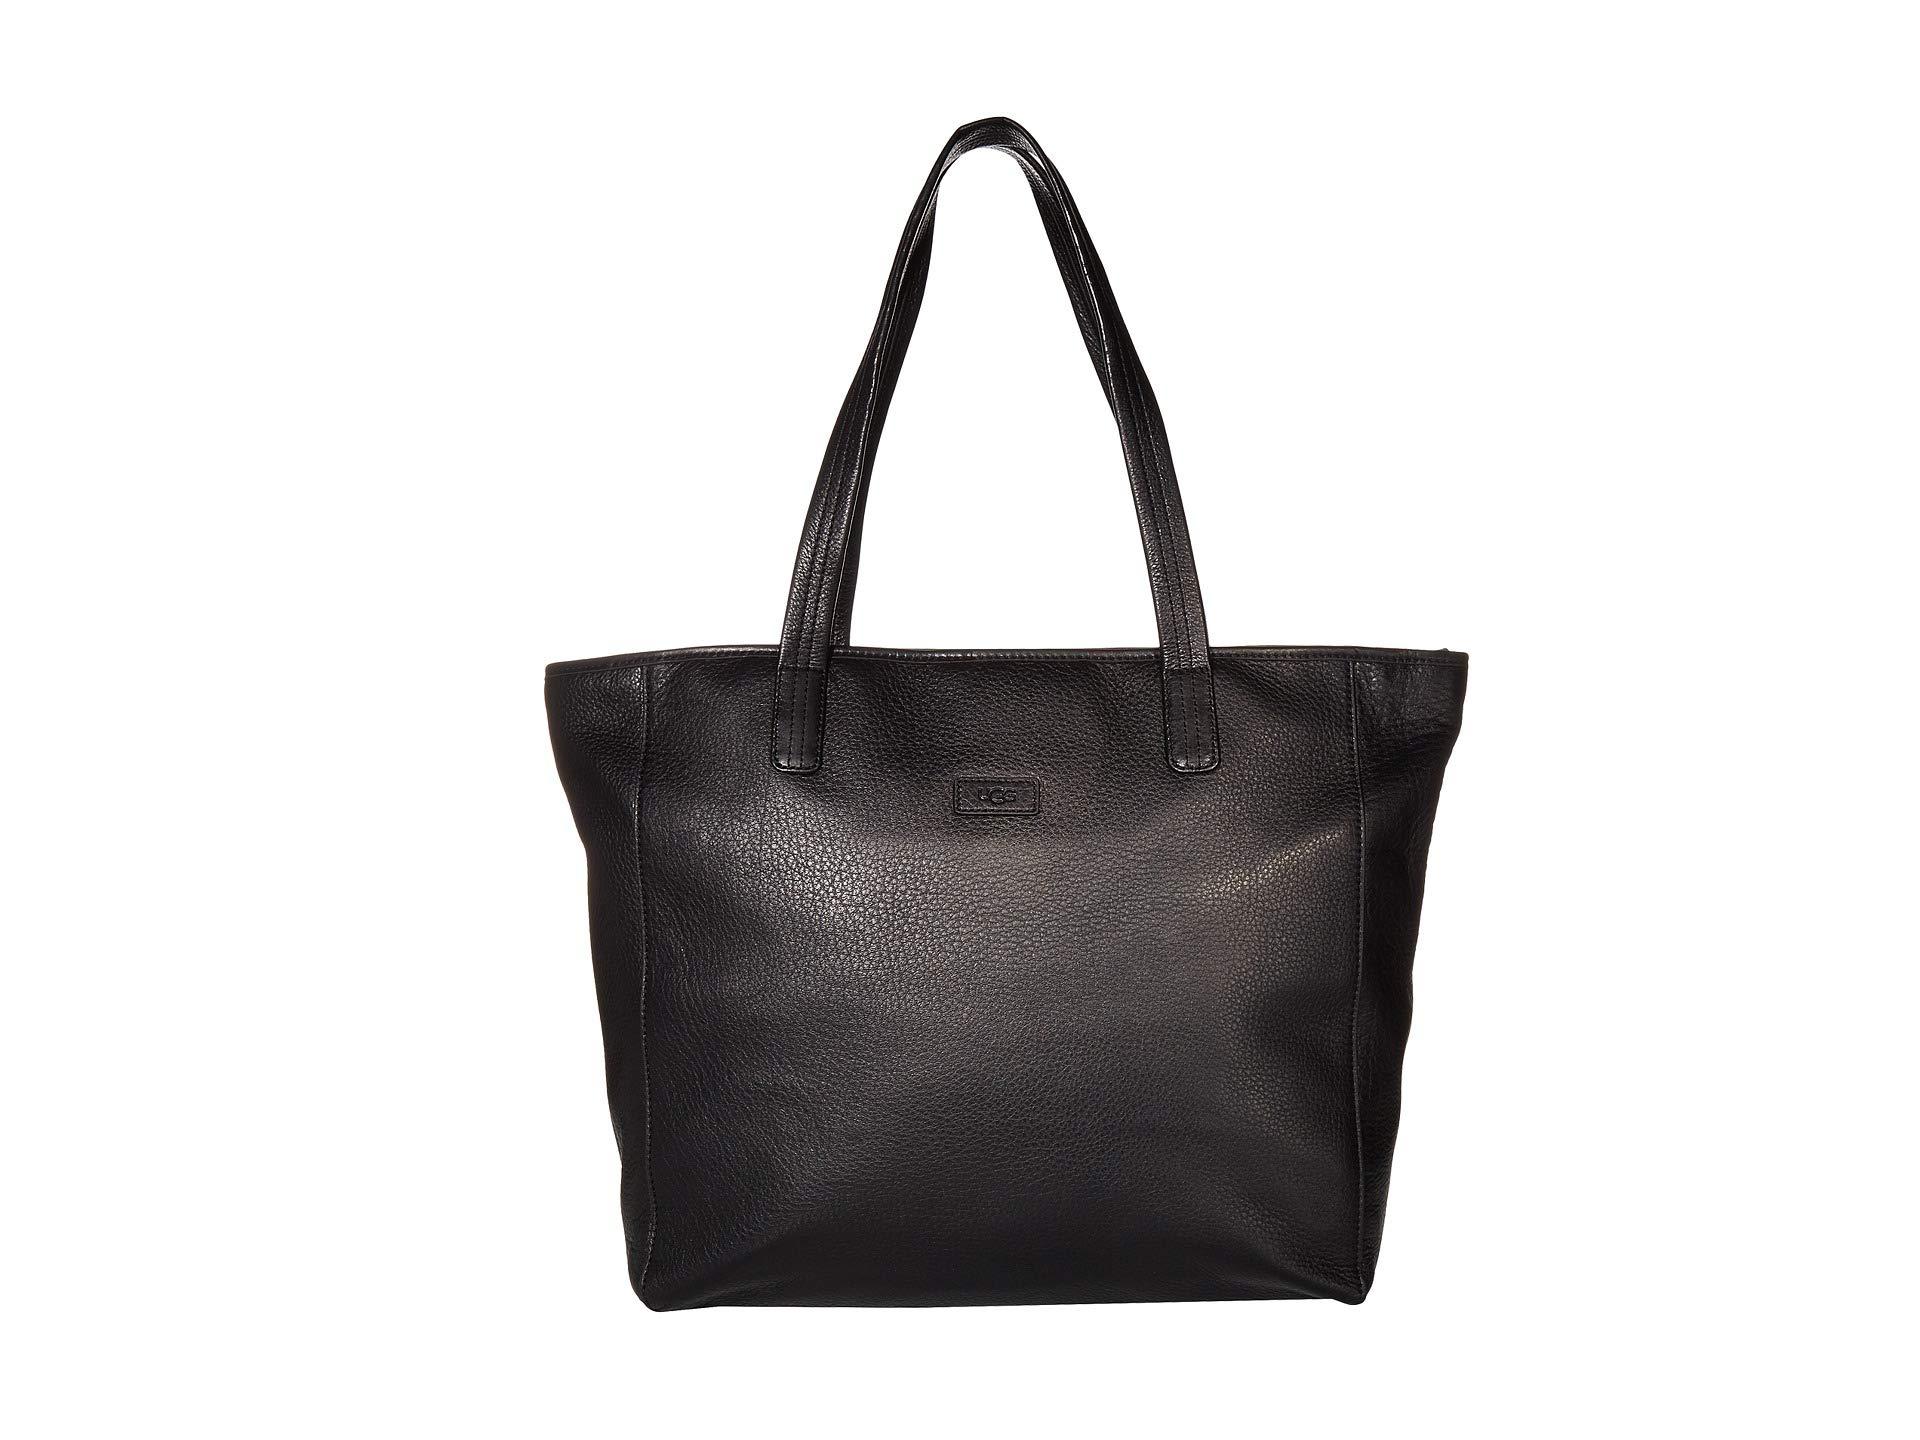 UGG Alina East/west Leather Tote in Black - Lyst